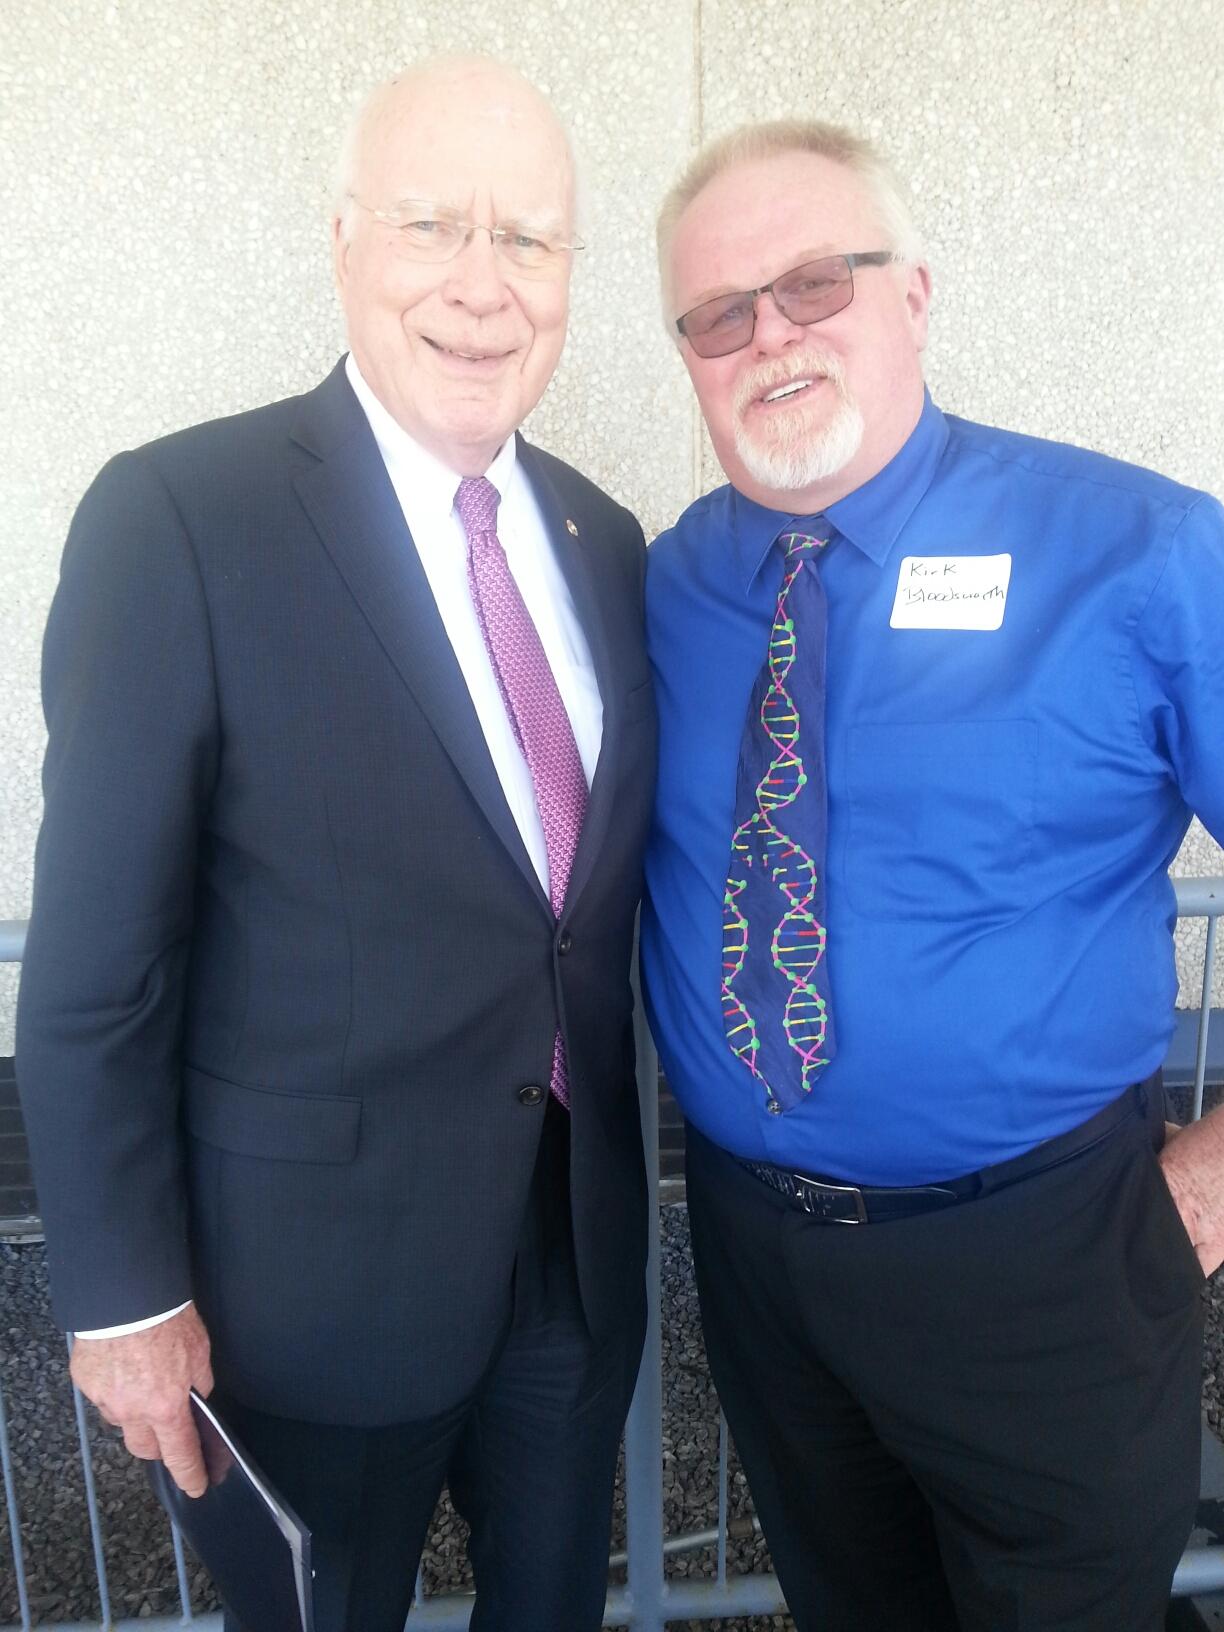 Kirk Bloodsworth (right) with Senator Patrick Leahy (D-VT) at the Coalition for Public Safety Bipartisan Summit on Fair Justice 